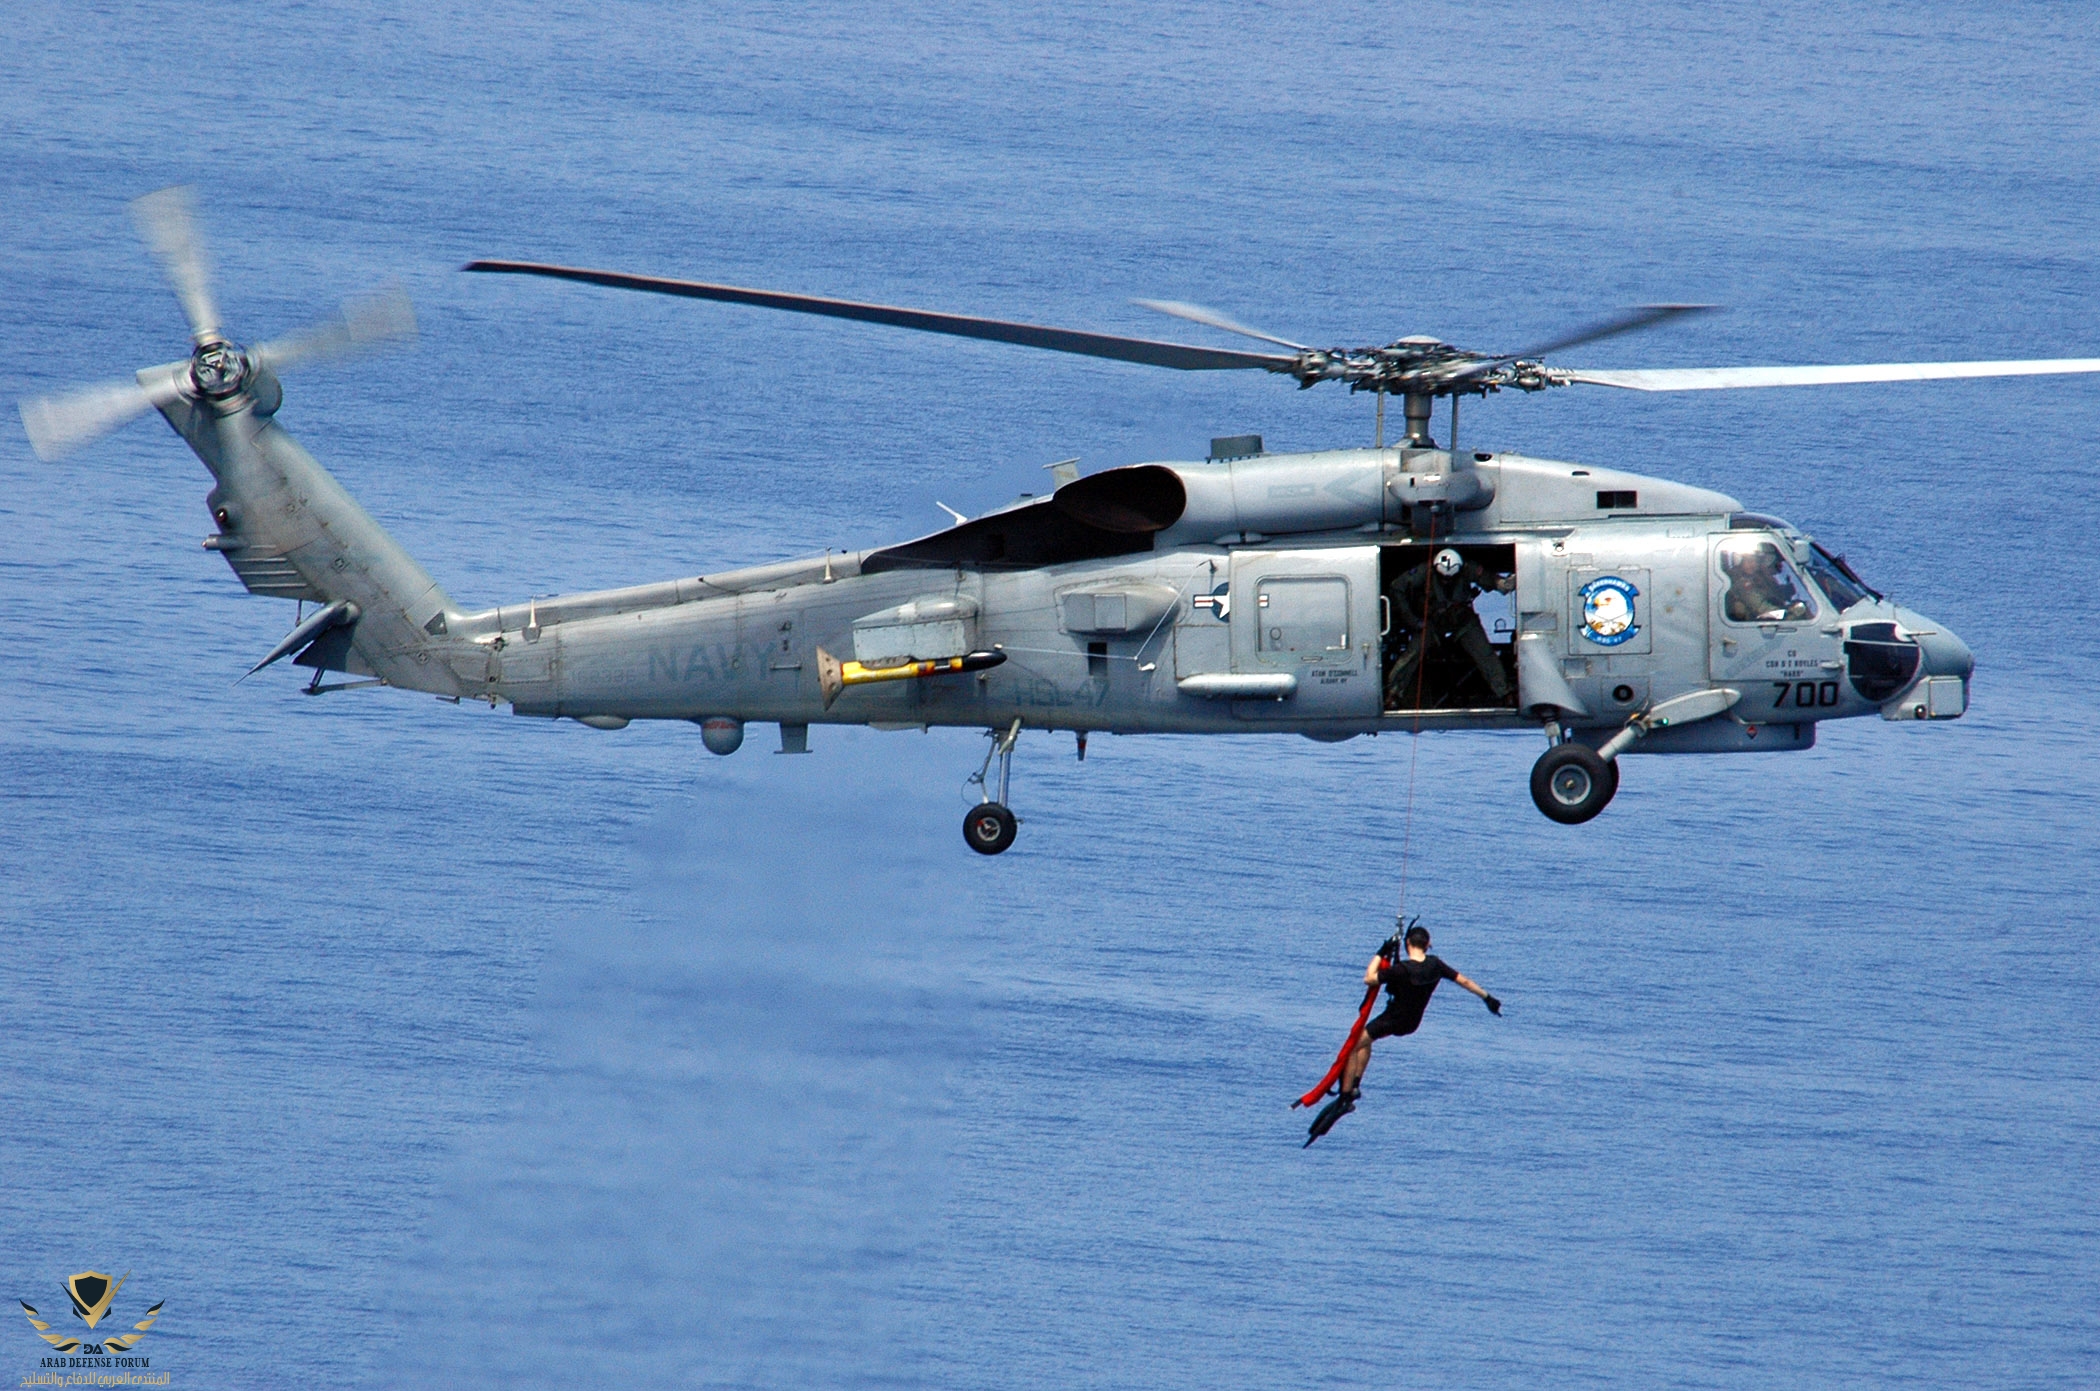 US_Navy_060417-N-9079D-095_An_SH-60B_Seahawk_helicopter_assigned_to_Helicopter_Anti-Submarine_...jpg